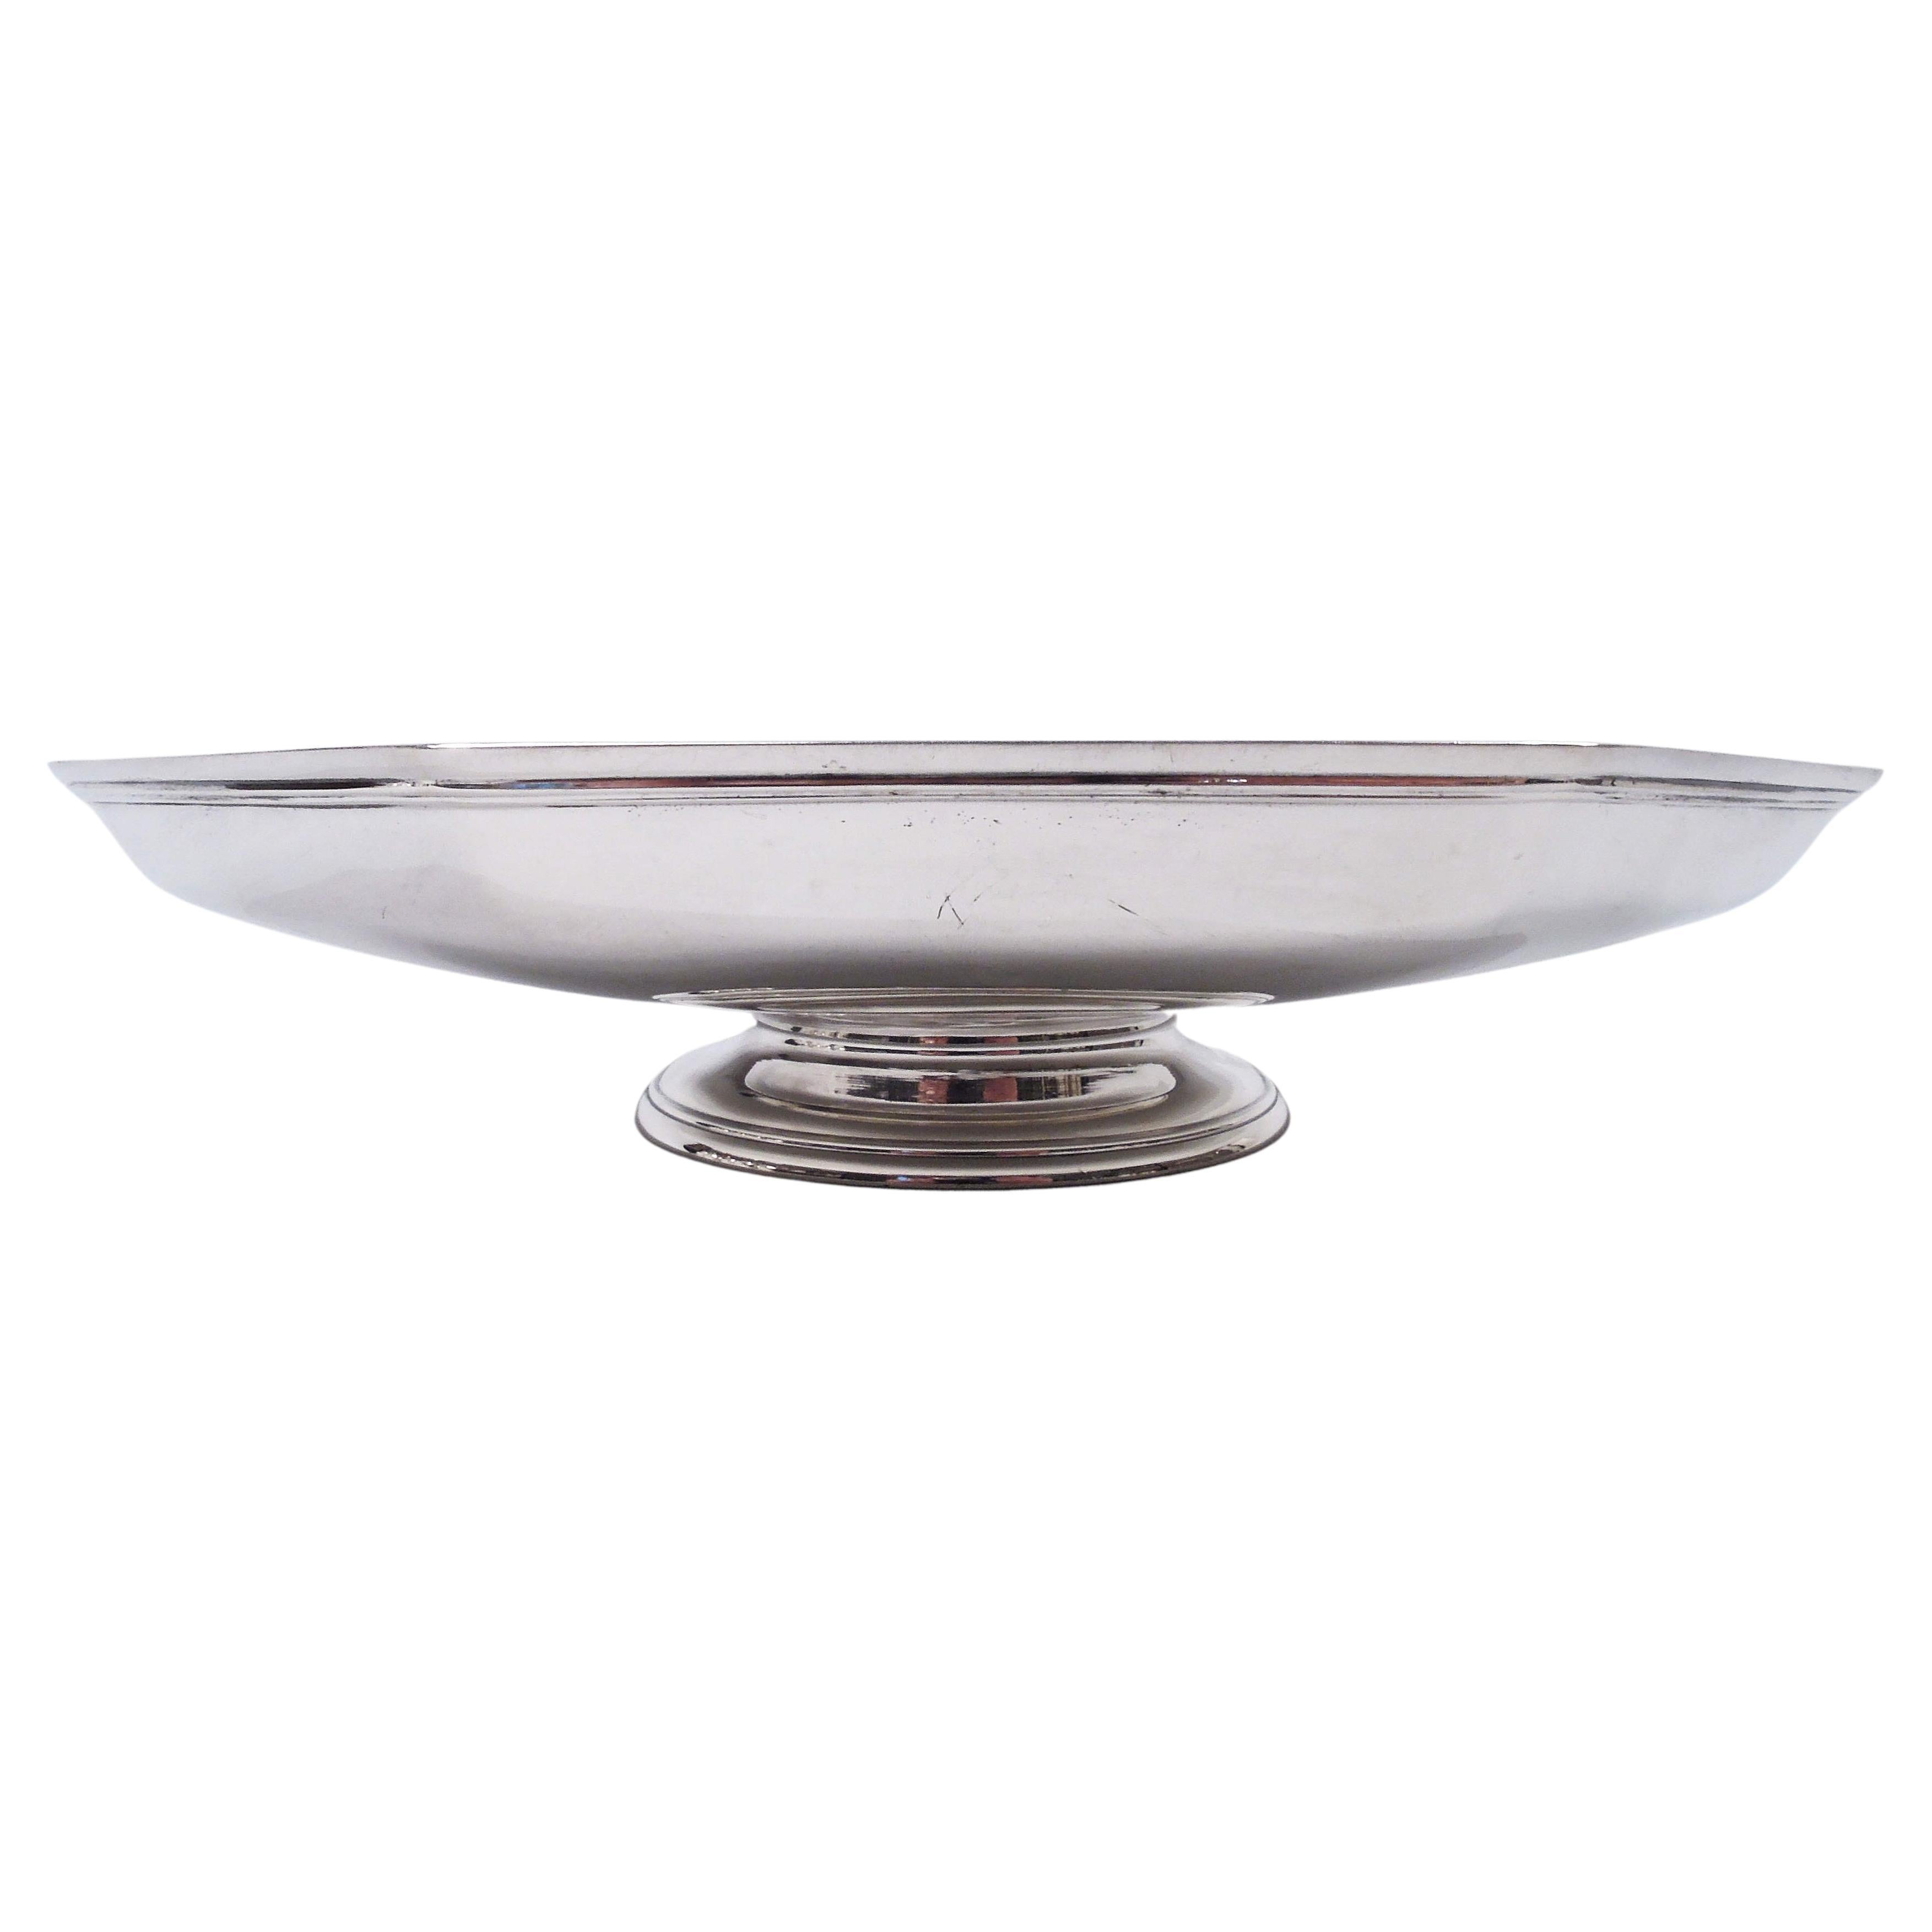 Tiffany American Art Deco Sterling Silver Footed Bowl C 1914